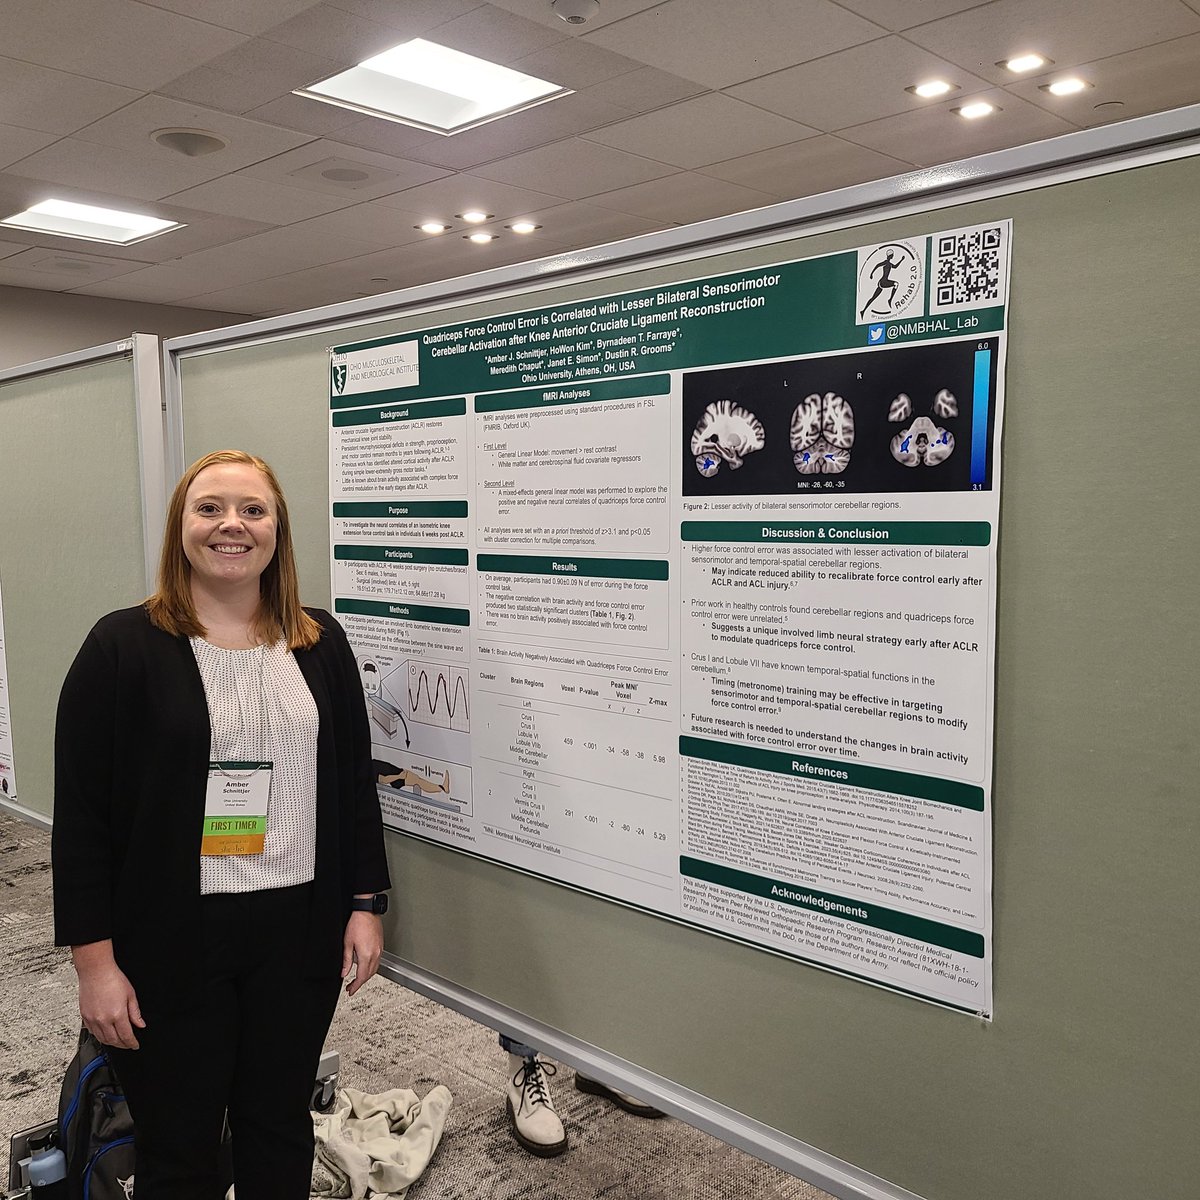 Day 2 @ncm_soc #NCMVIC23 for @NMBHAL_Lab @OMNIohio @OHIOATEdu @OhioU_TBS up now is @amberschnittjer with brain activity associated with force control after #ACL Injury